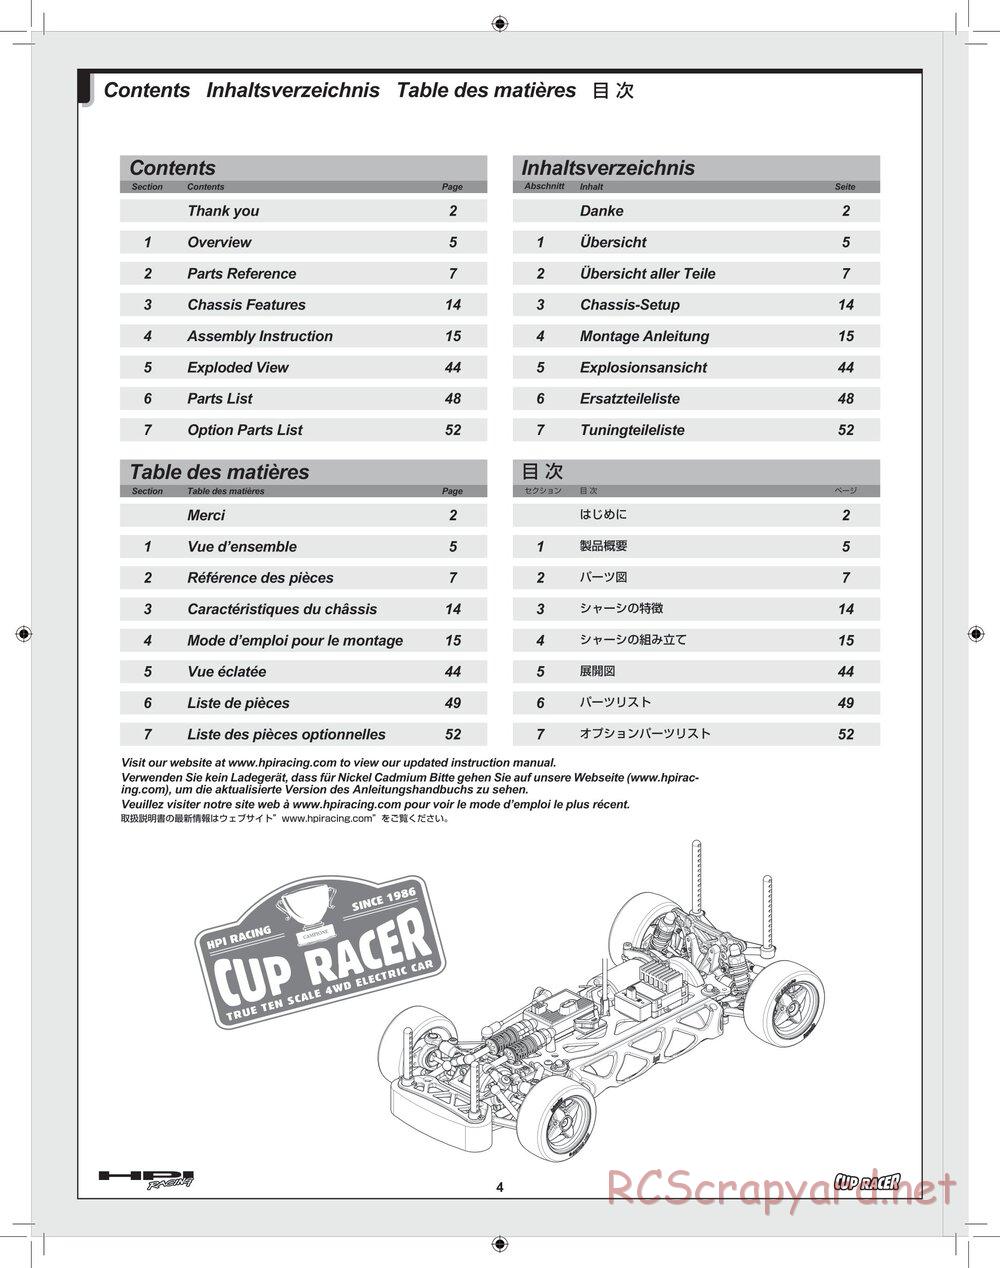 HPI - Cup Racer - Manual - Page 4